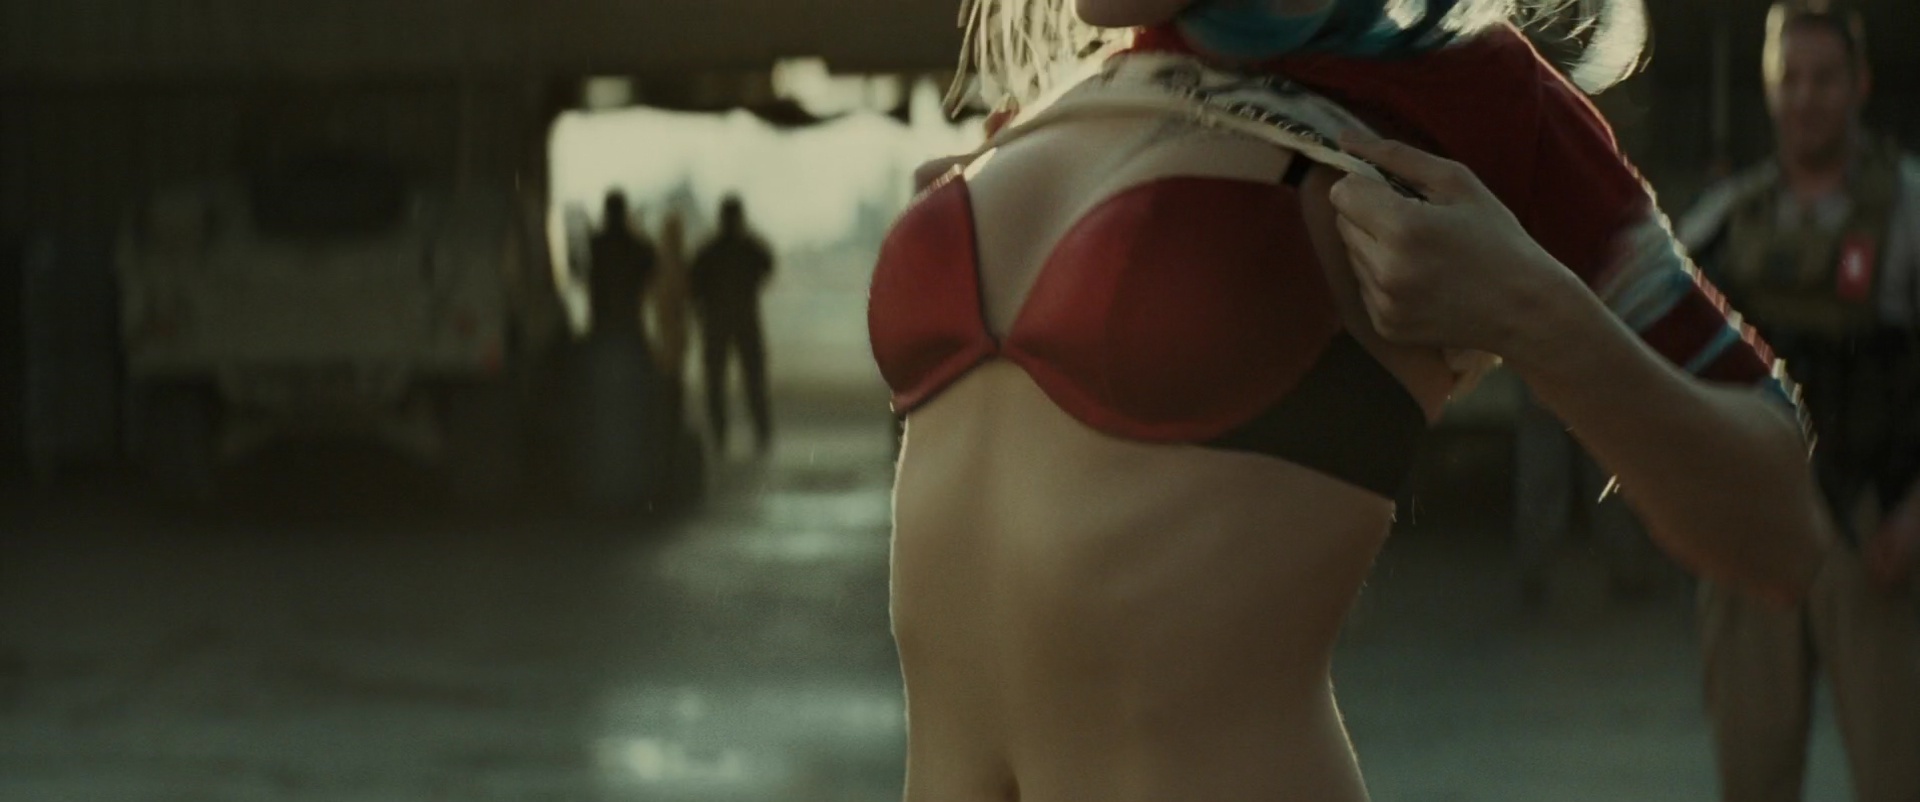 margot robbie naked suicide squad